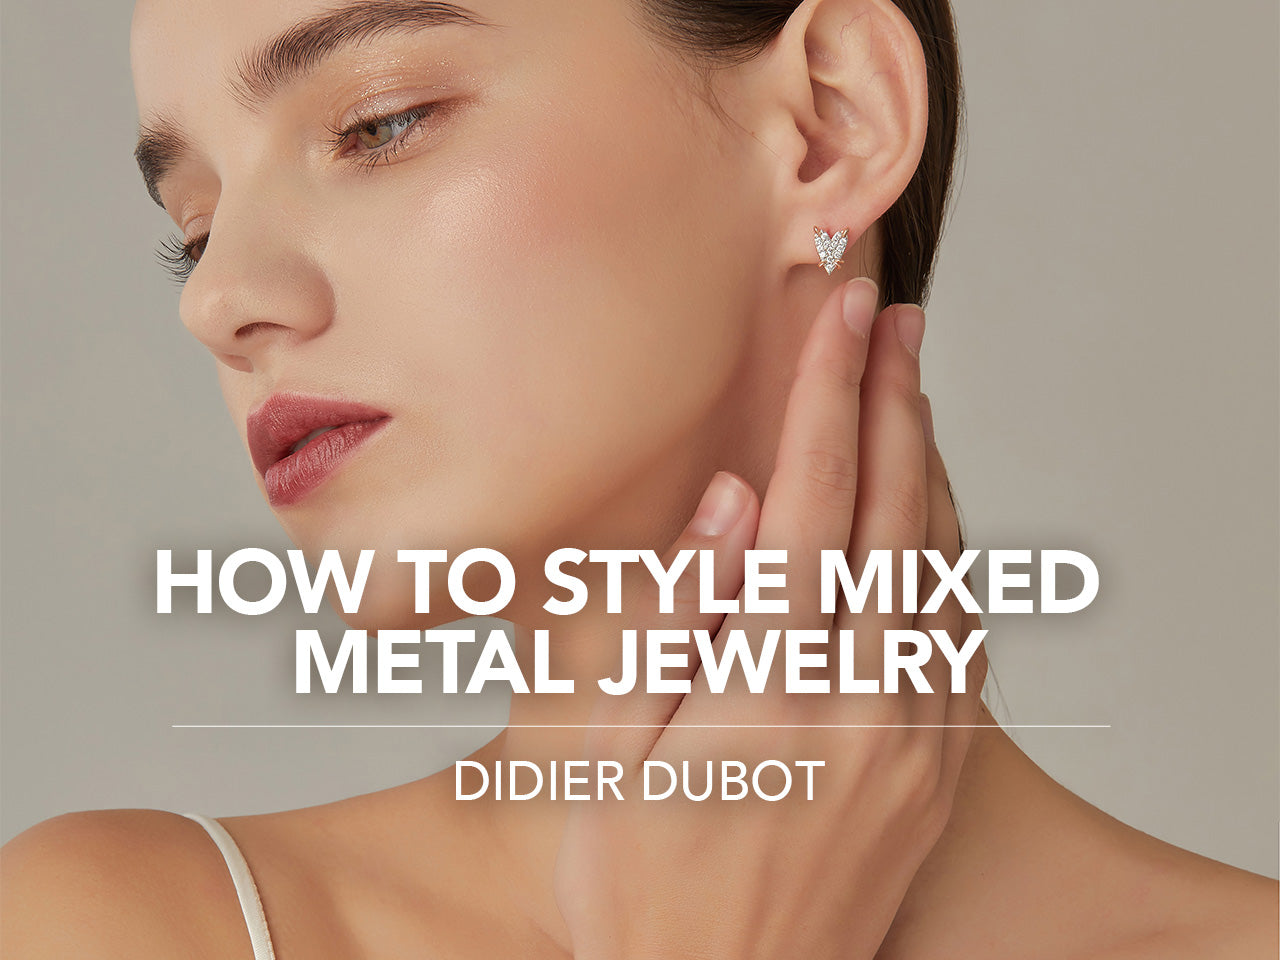 How To Style Mixed Metal Jewelry